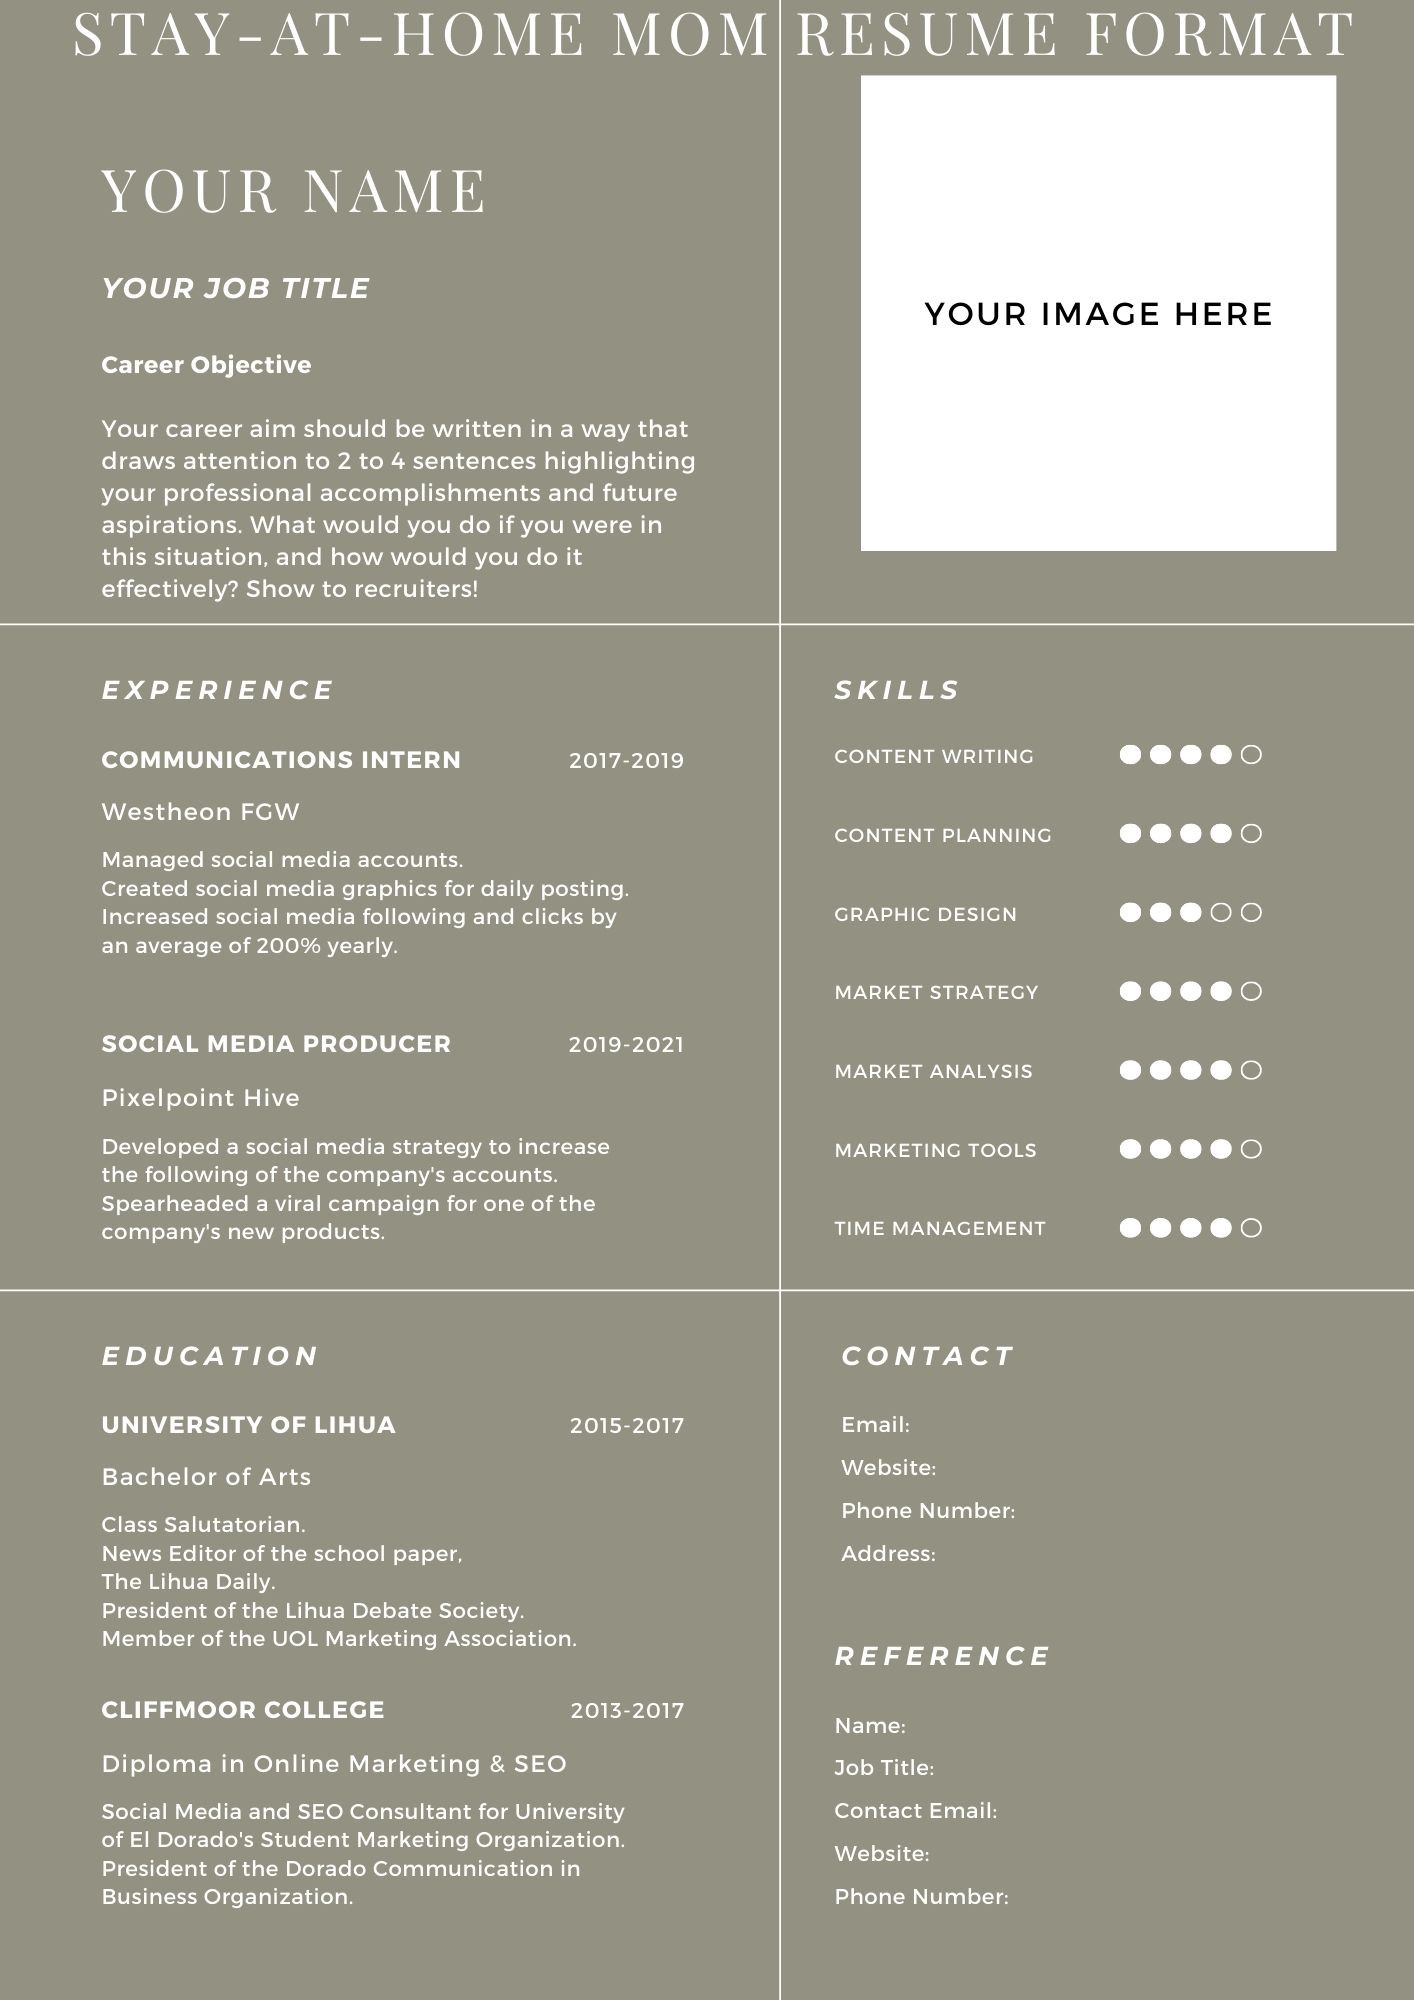 Sample Resume with Stay at Home Mom Stay-at-home Mom Resume Skills and Best Resume Writing Tips